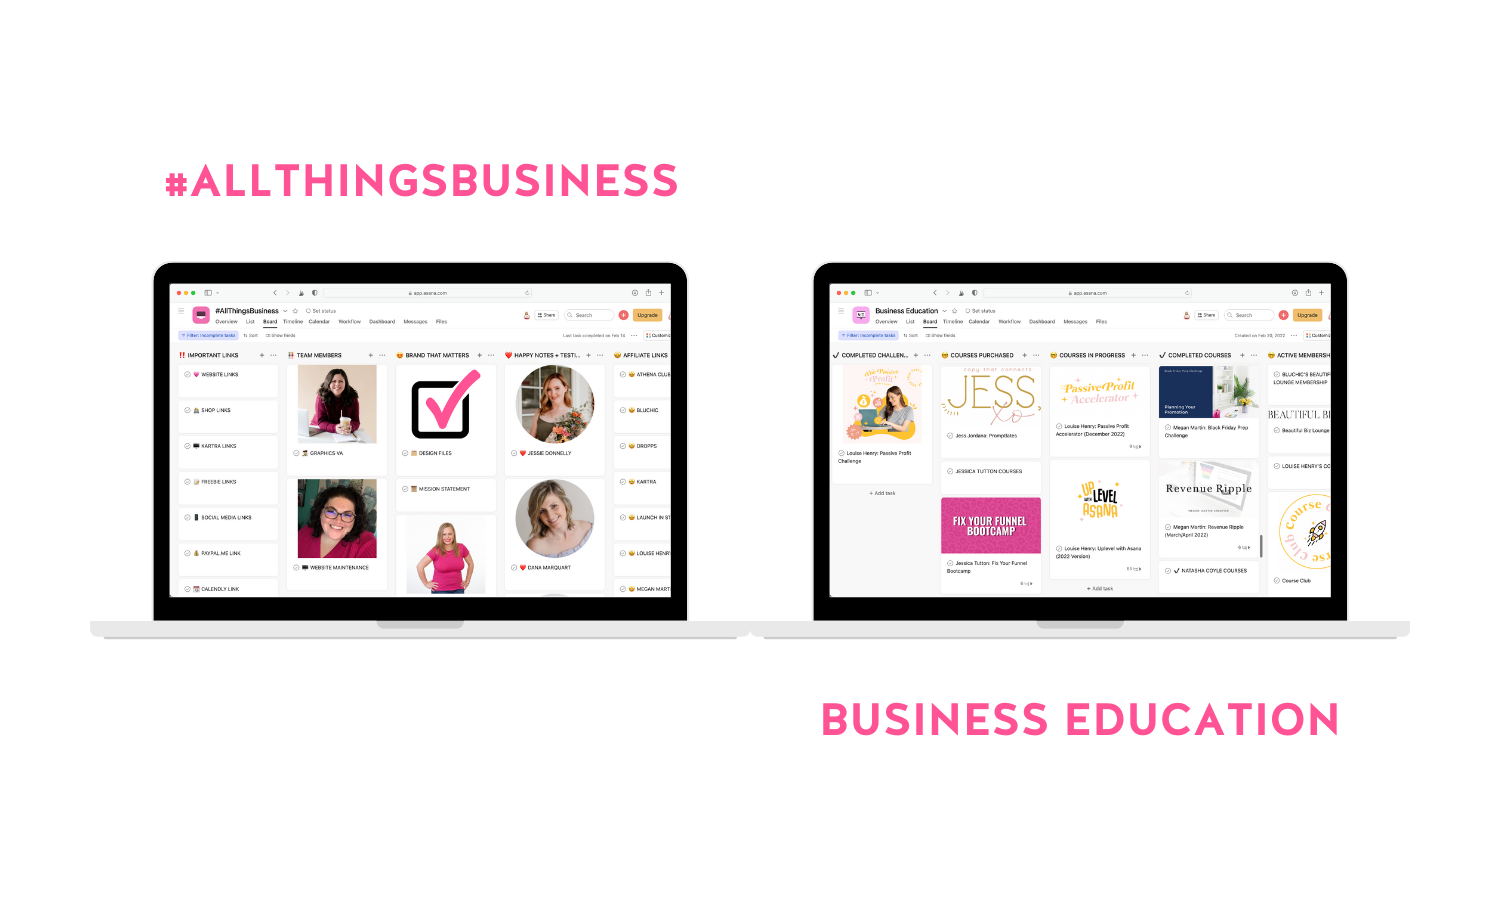 Screenshots of my #AllThingsBusiness and Business Education projects in Asana.